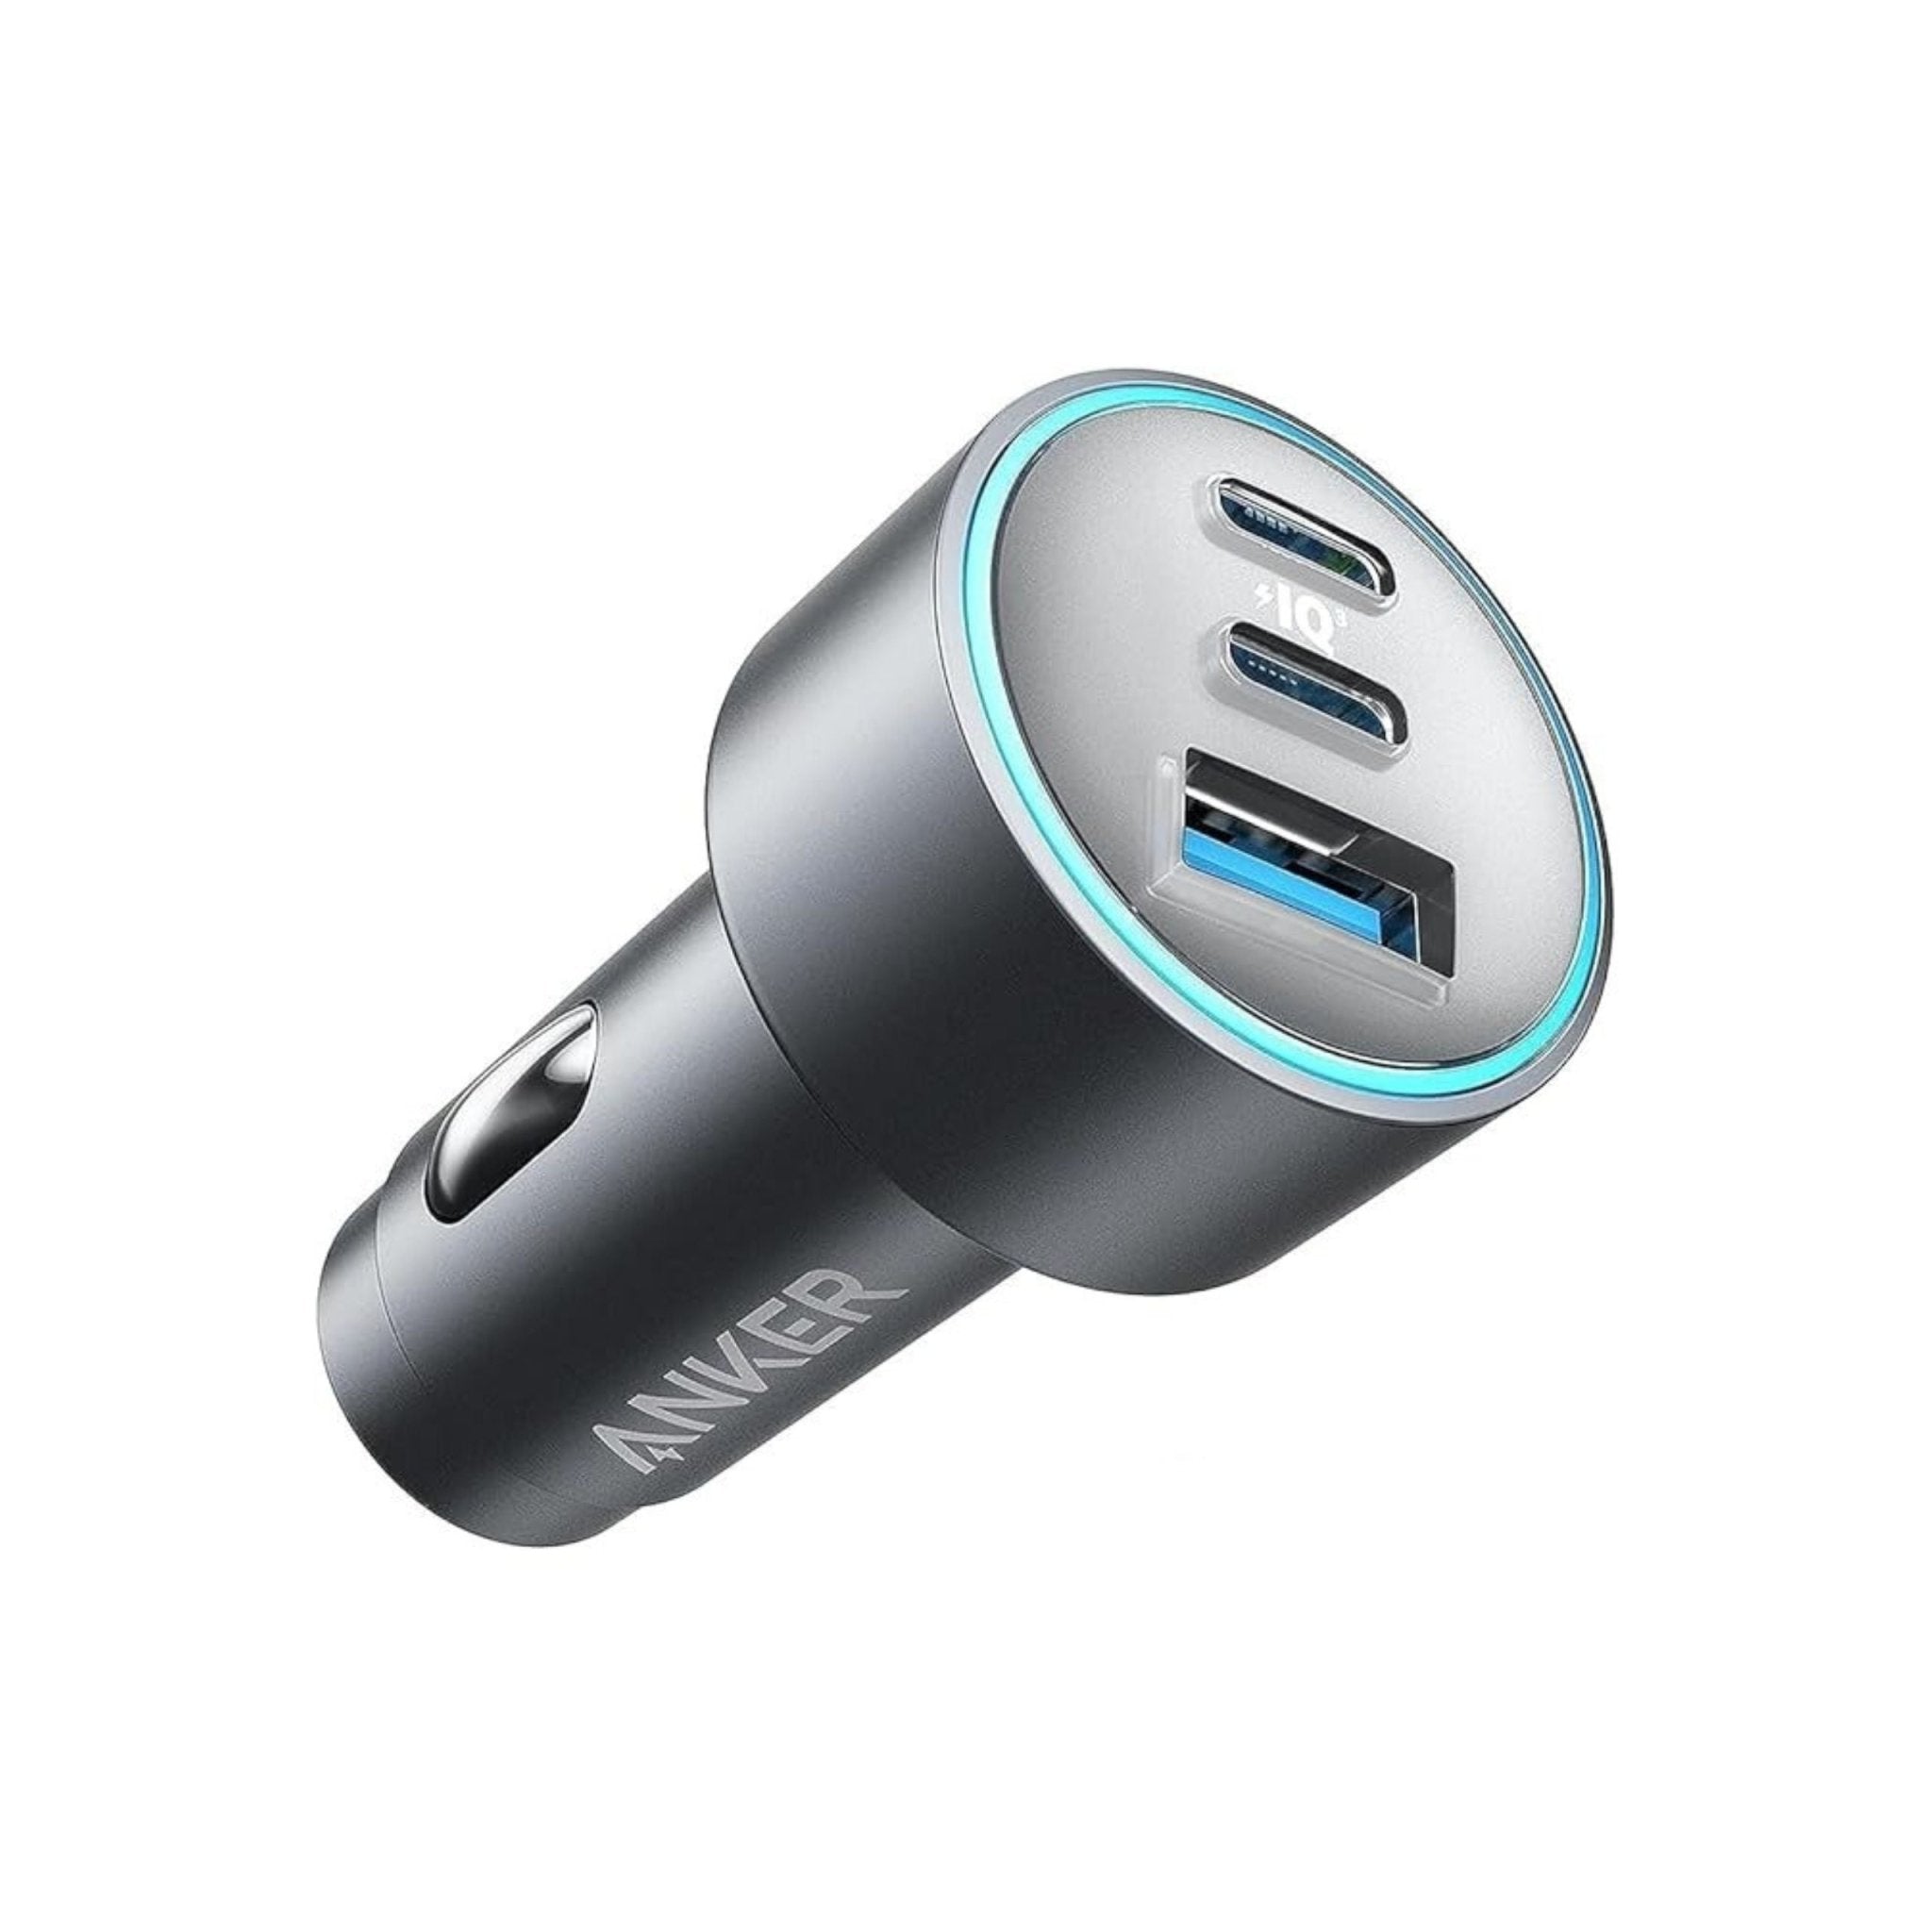 Anker 535 Car Charger 67W With 1 USB & 2 Type-C Ports - Silver